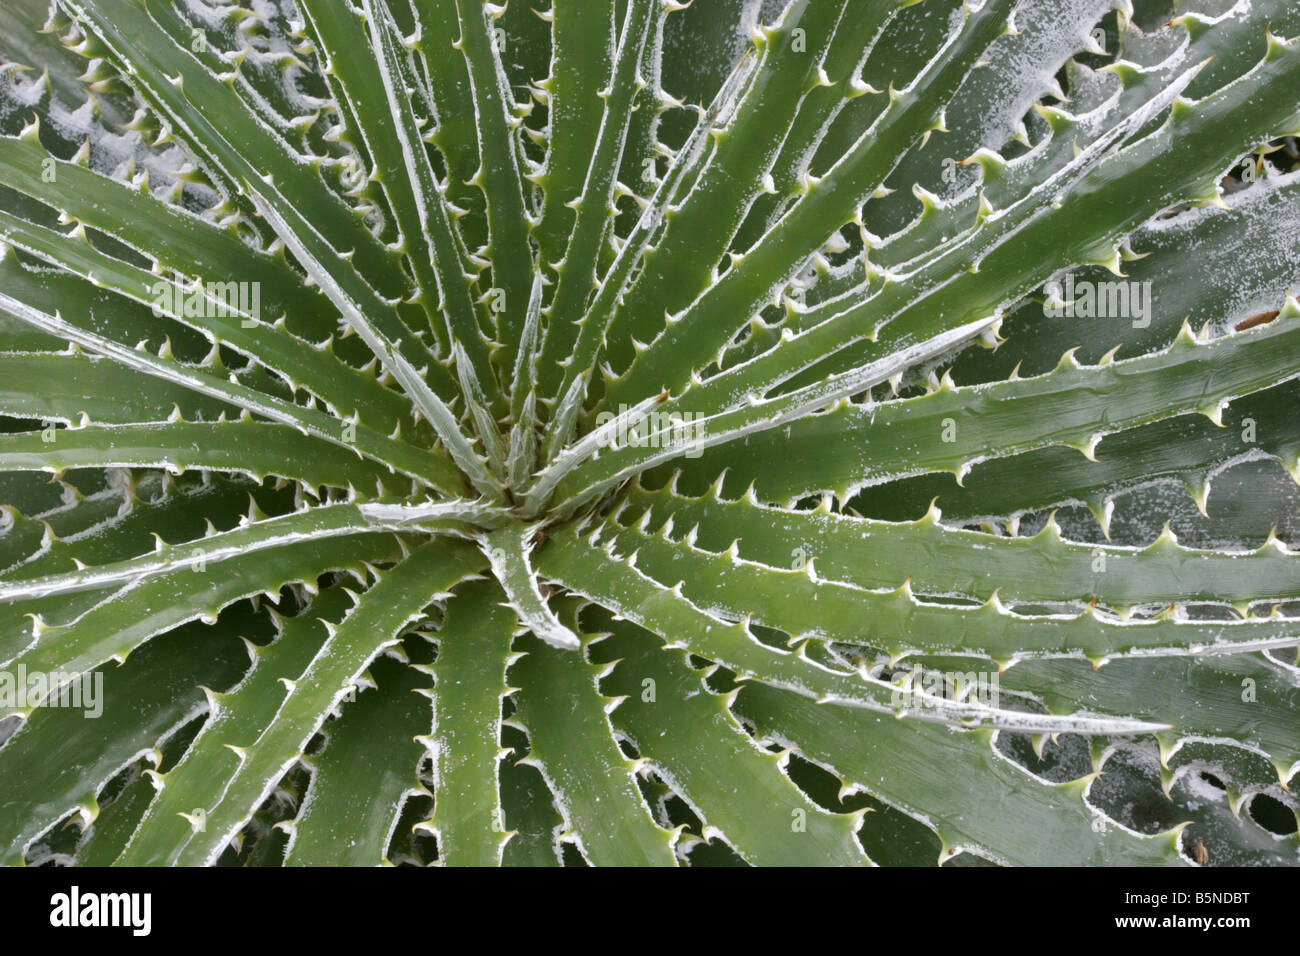 Hechtia argentea From Central America Stock Photo